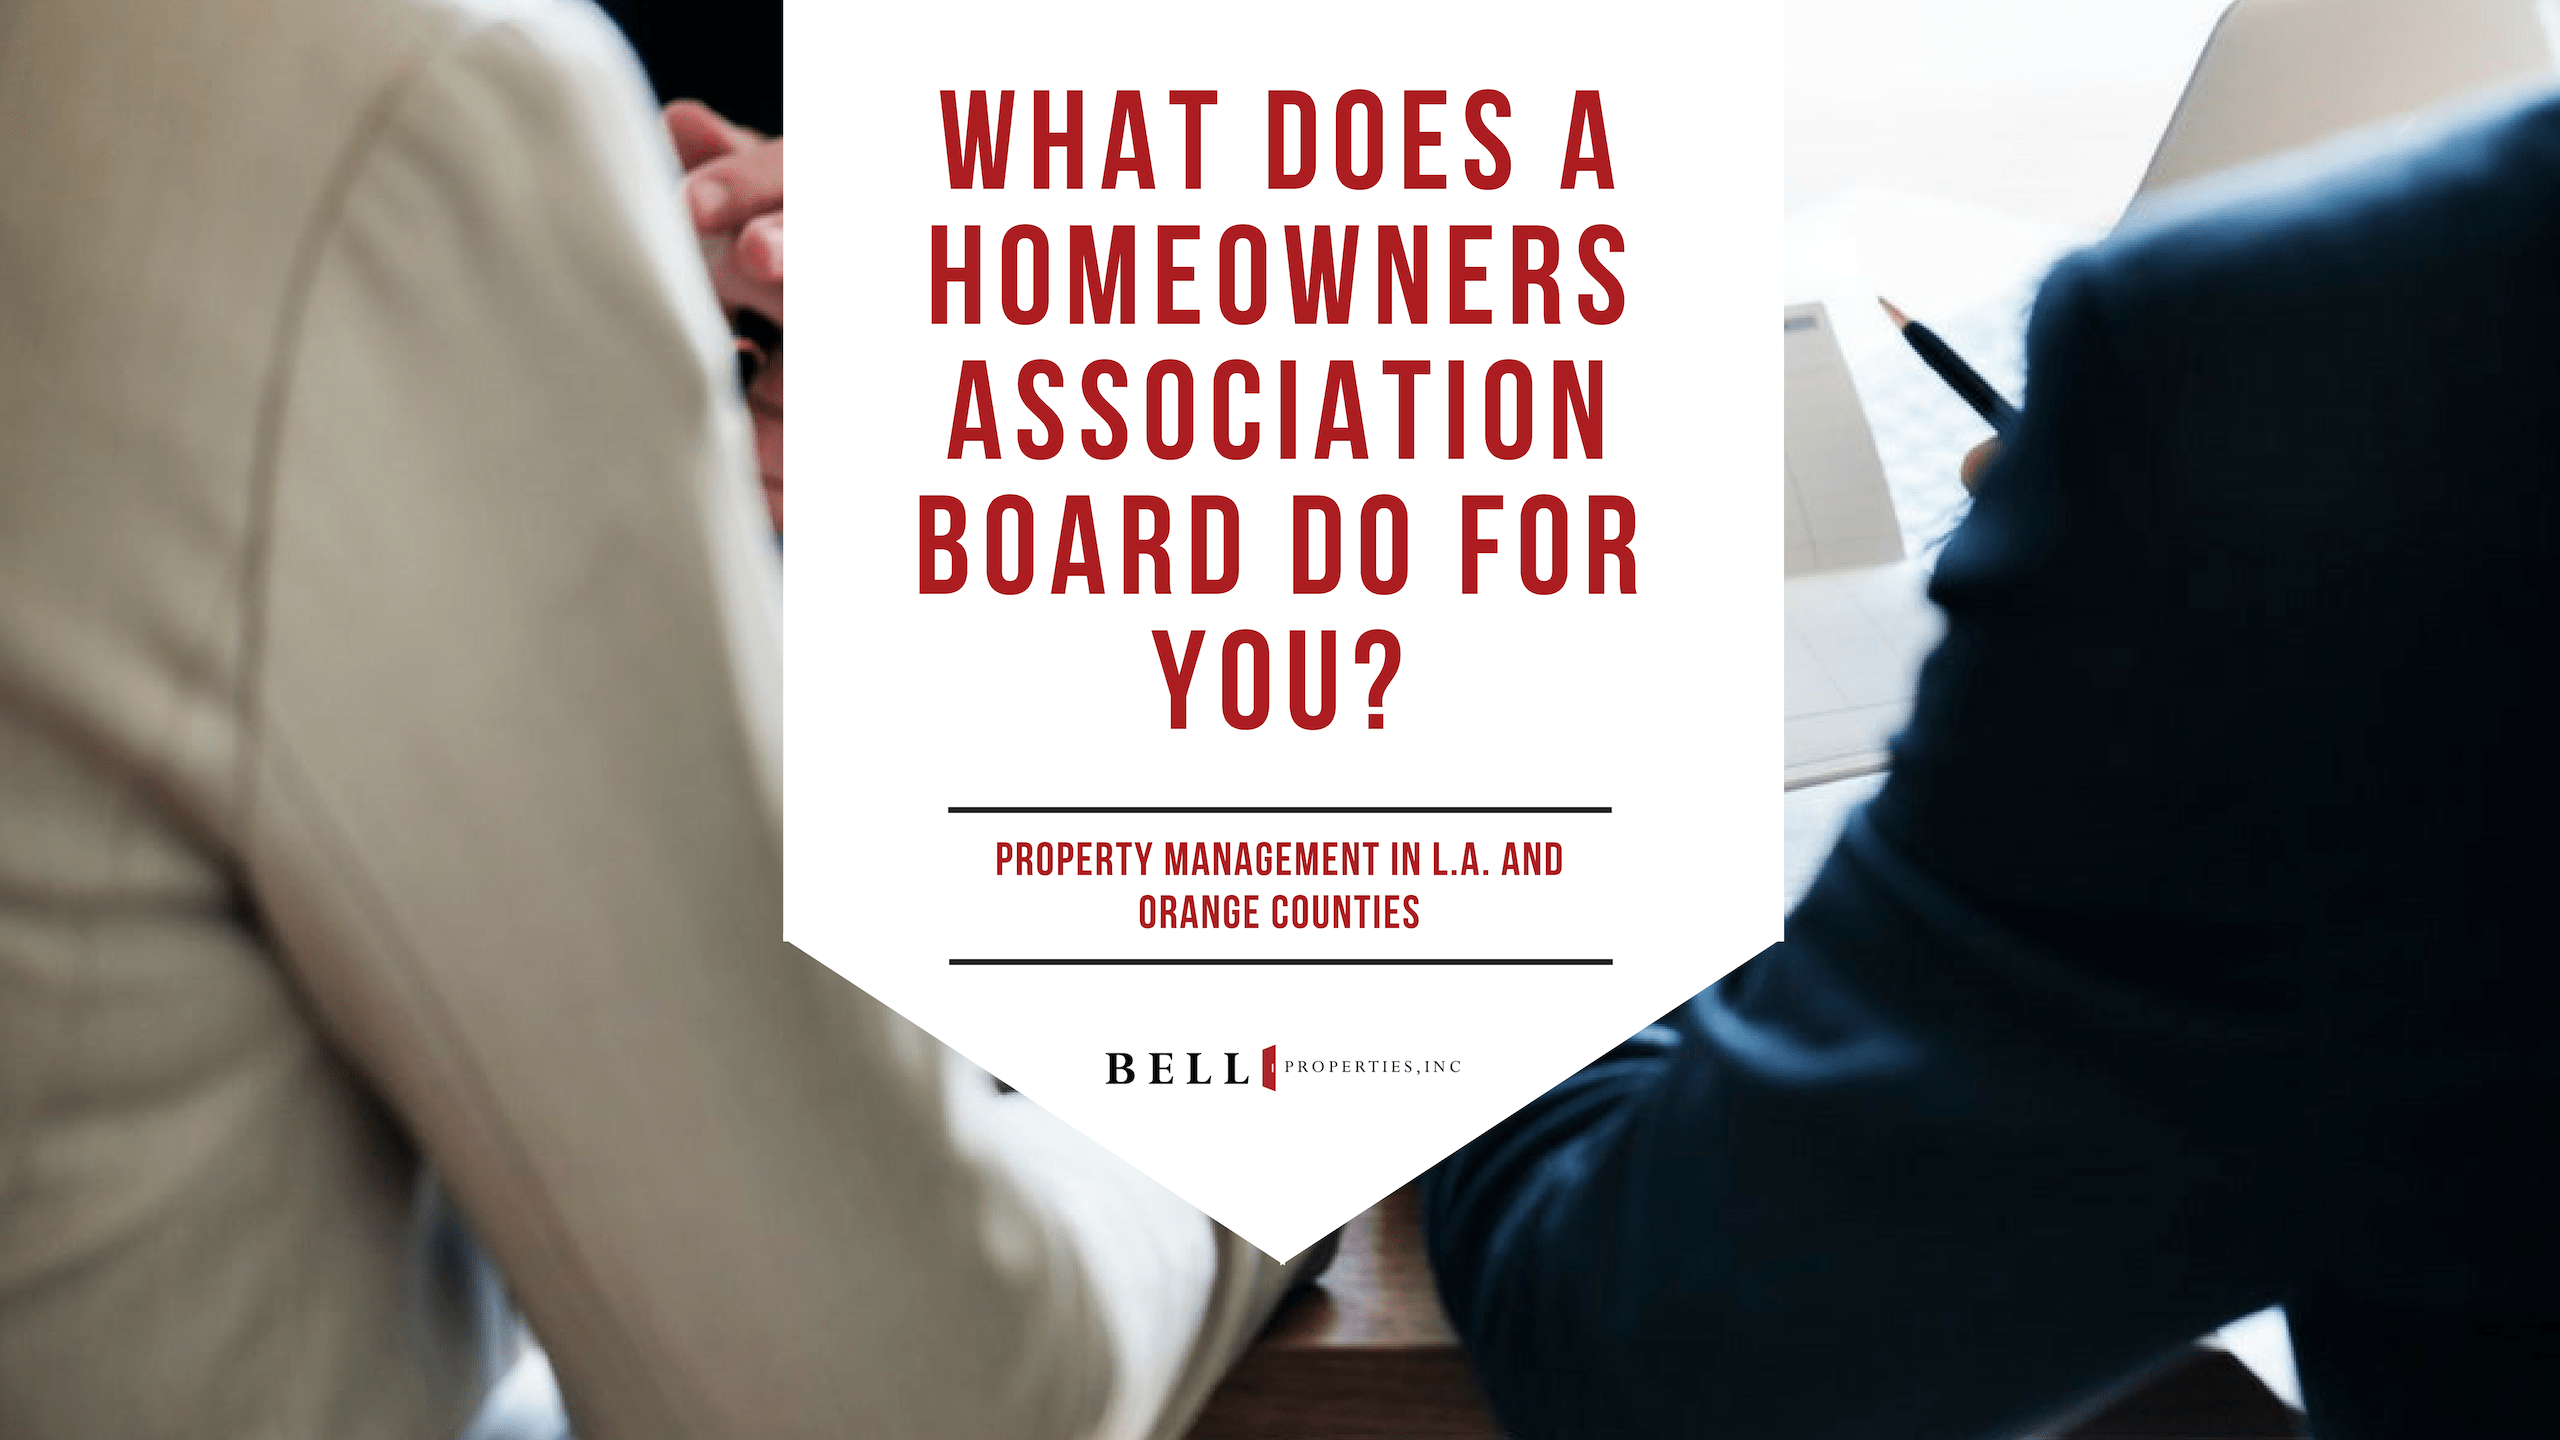 What Does a Los Angeles Homeowners Association Board do for You?